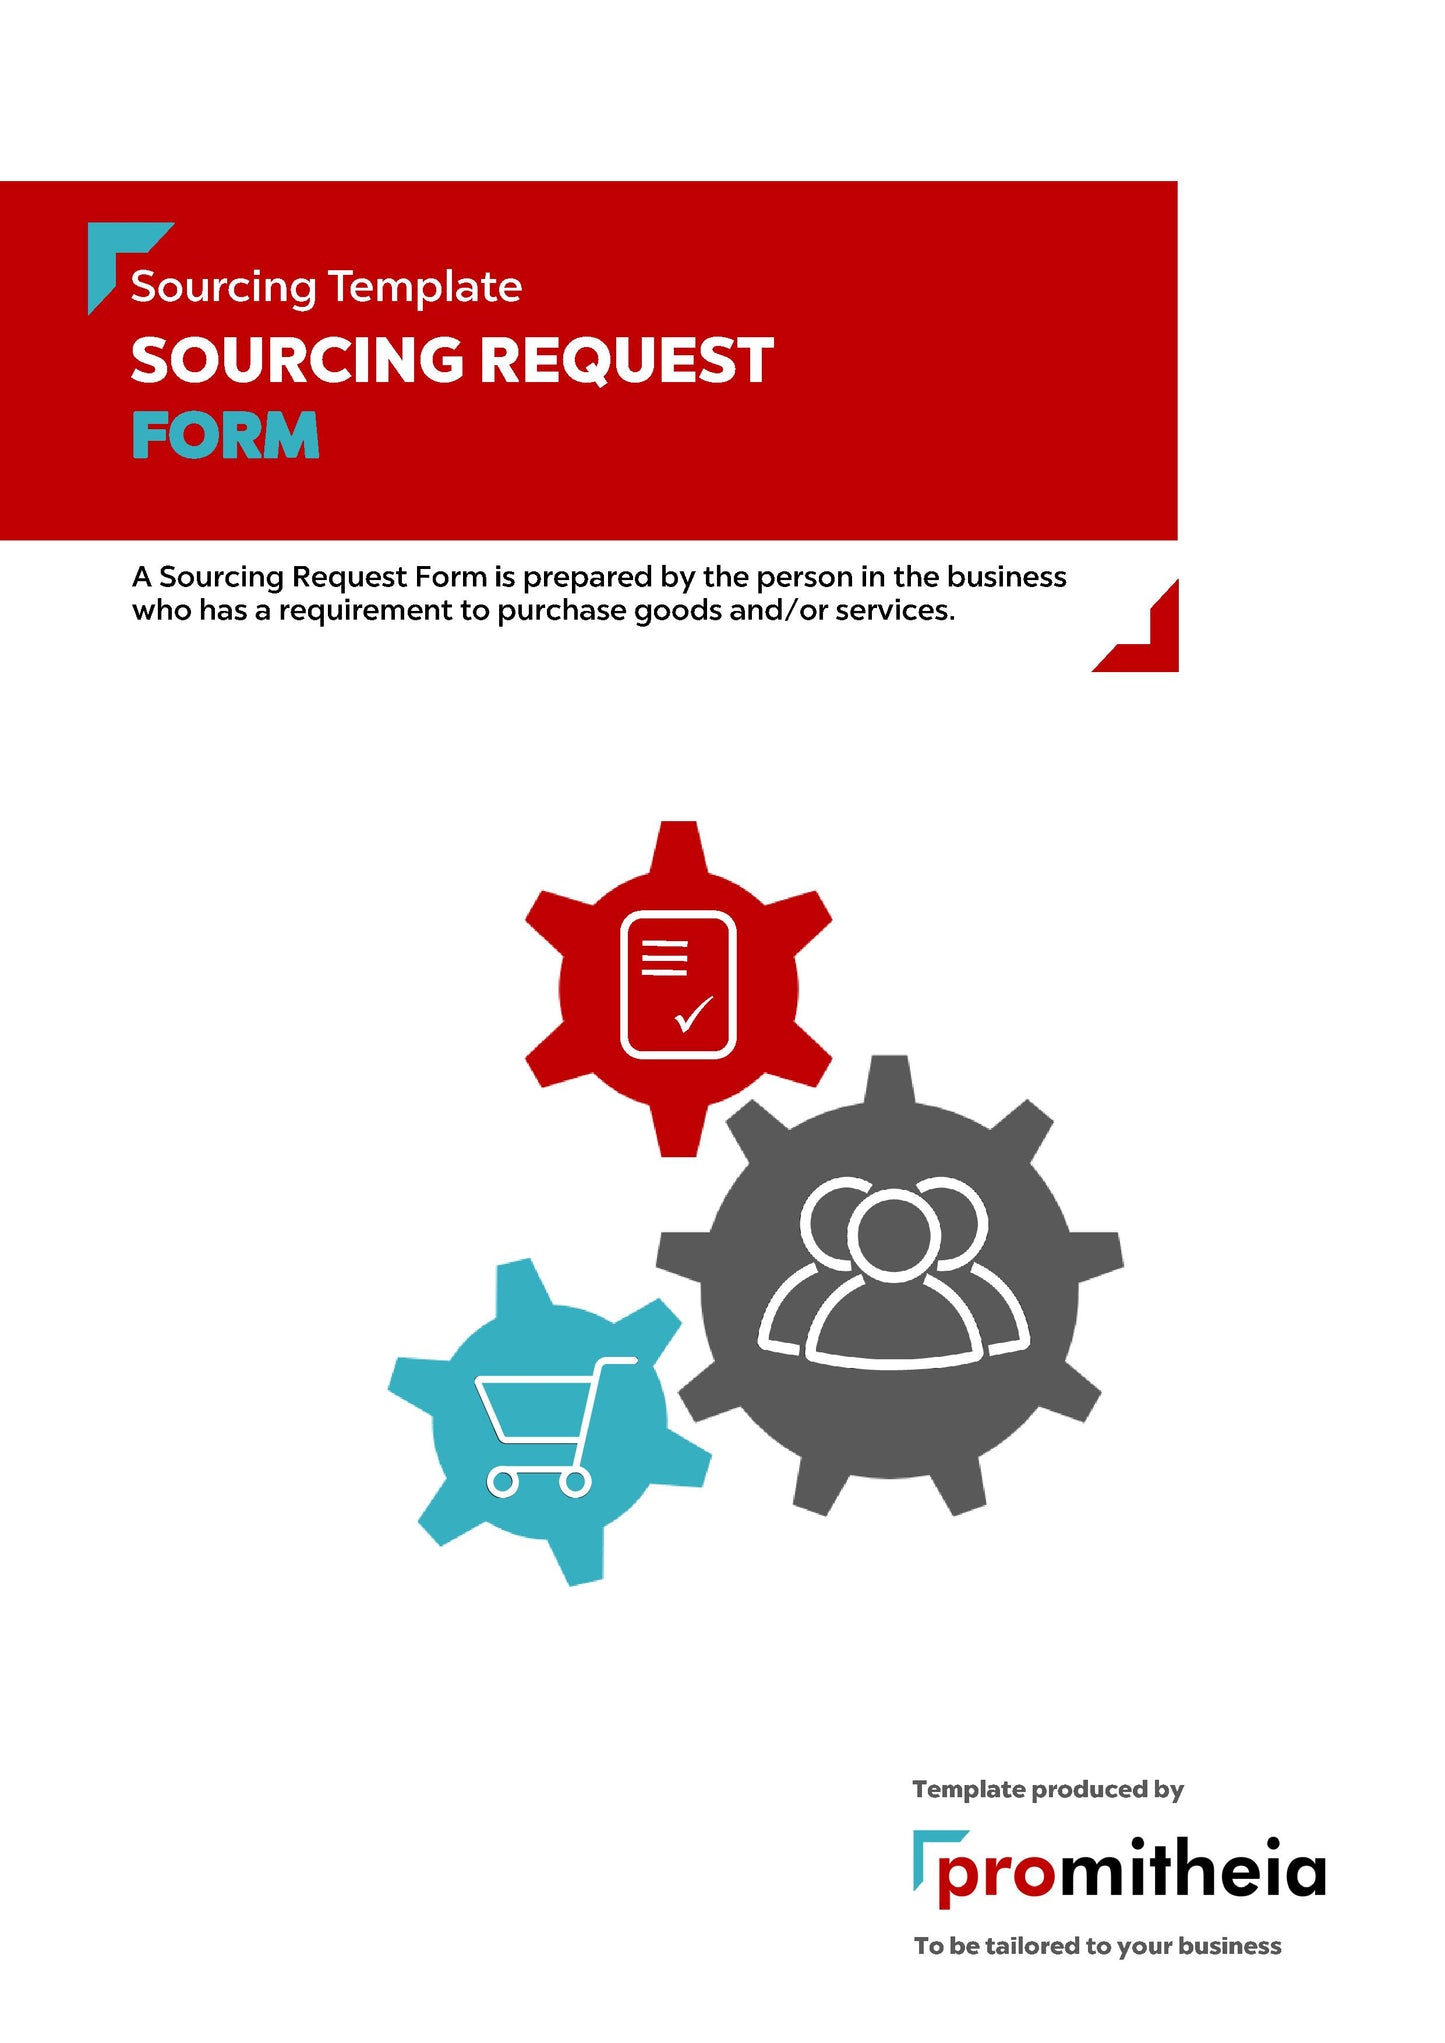 Sourcing Request Form